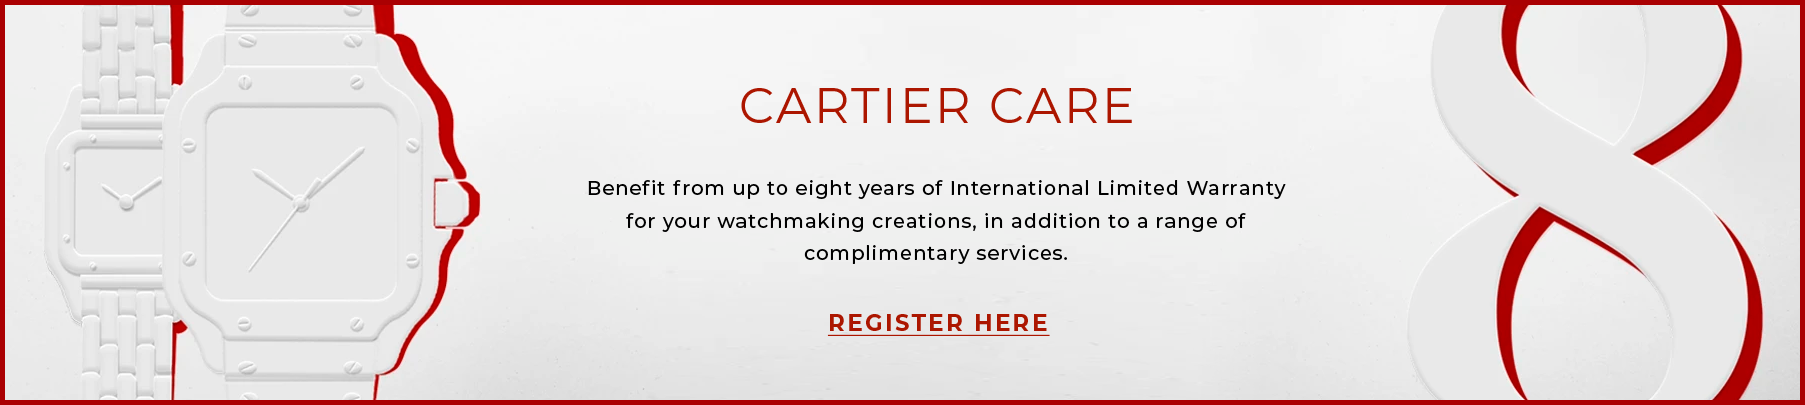 Cartier Care - Register for additional Warranty